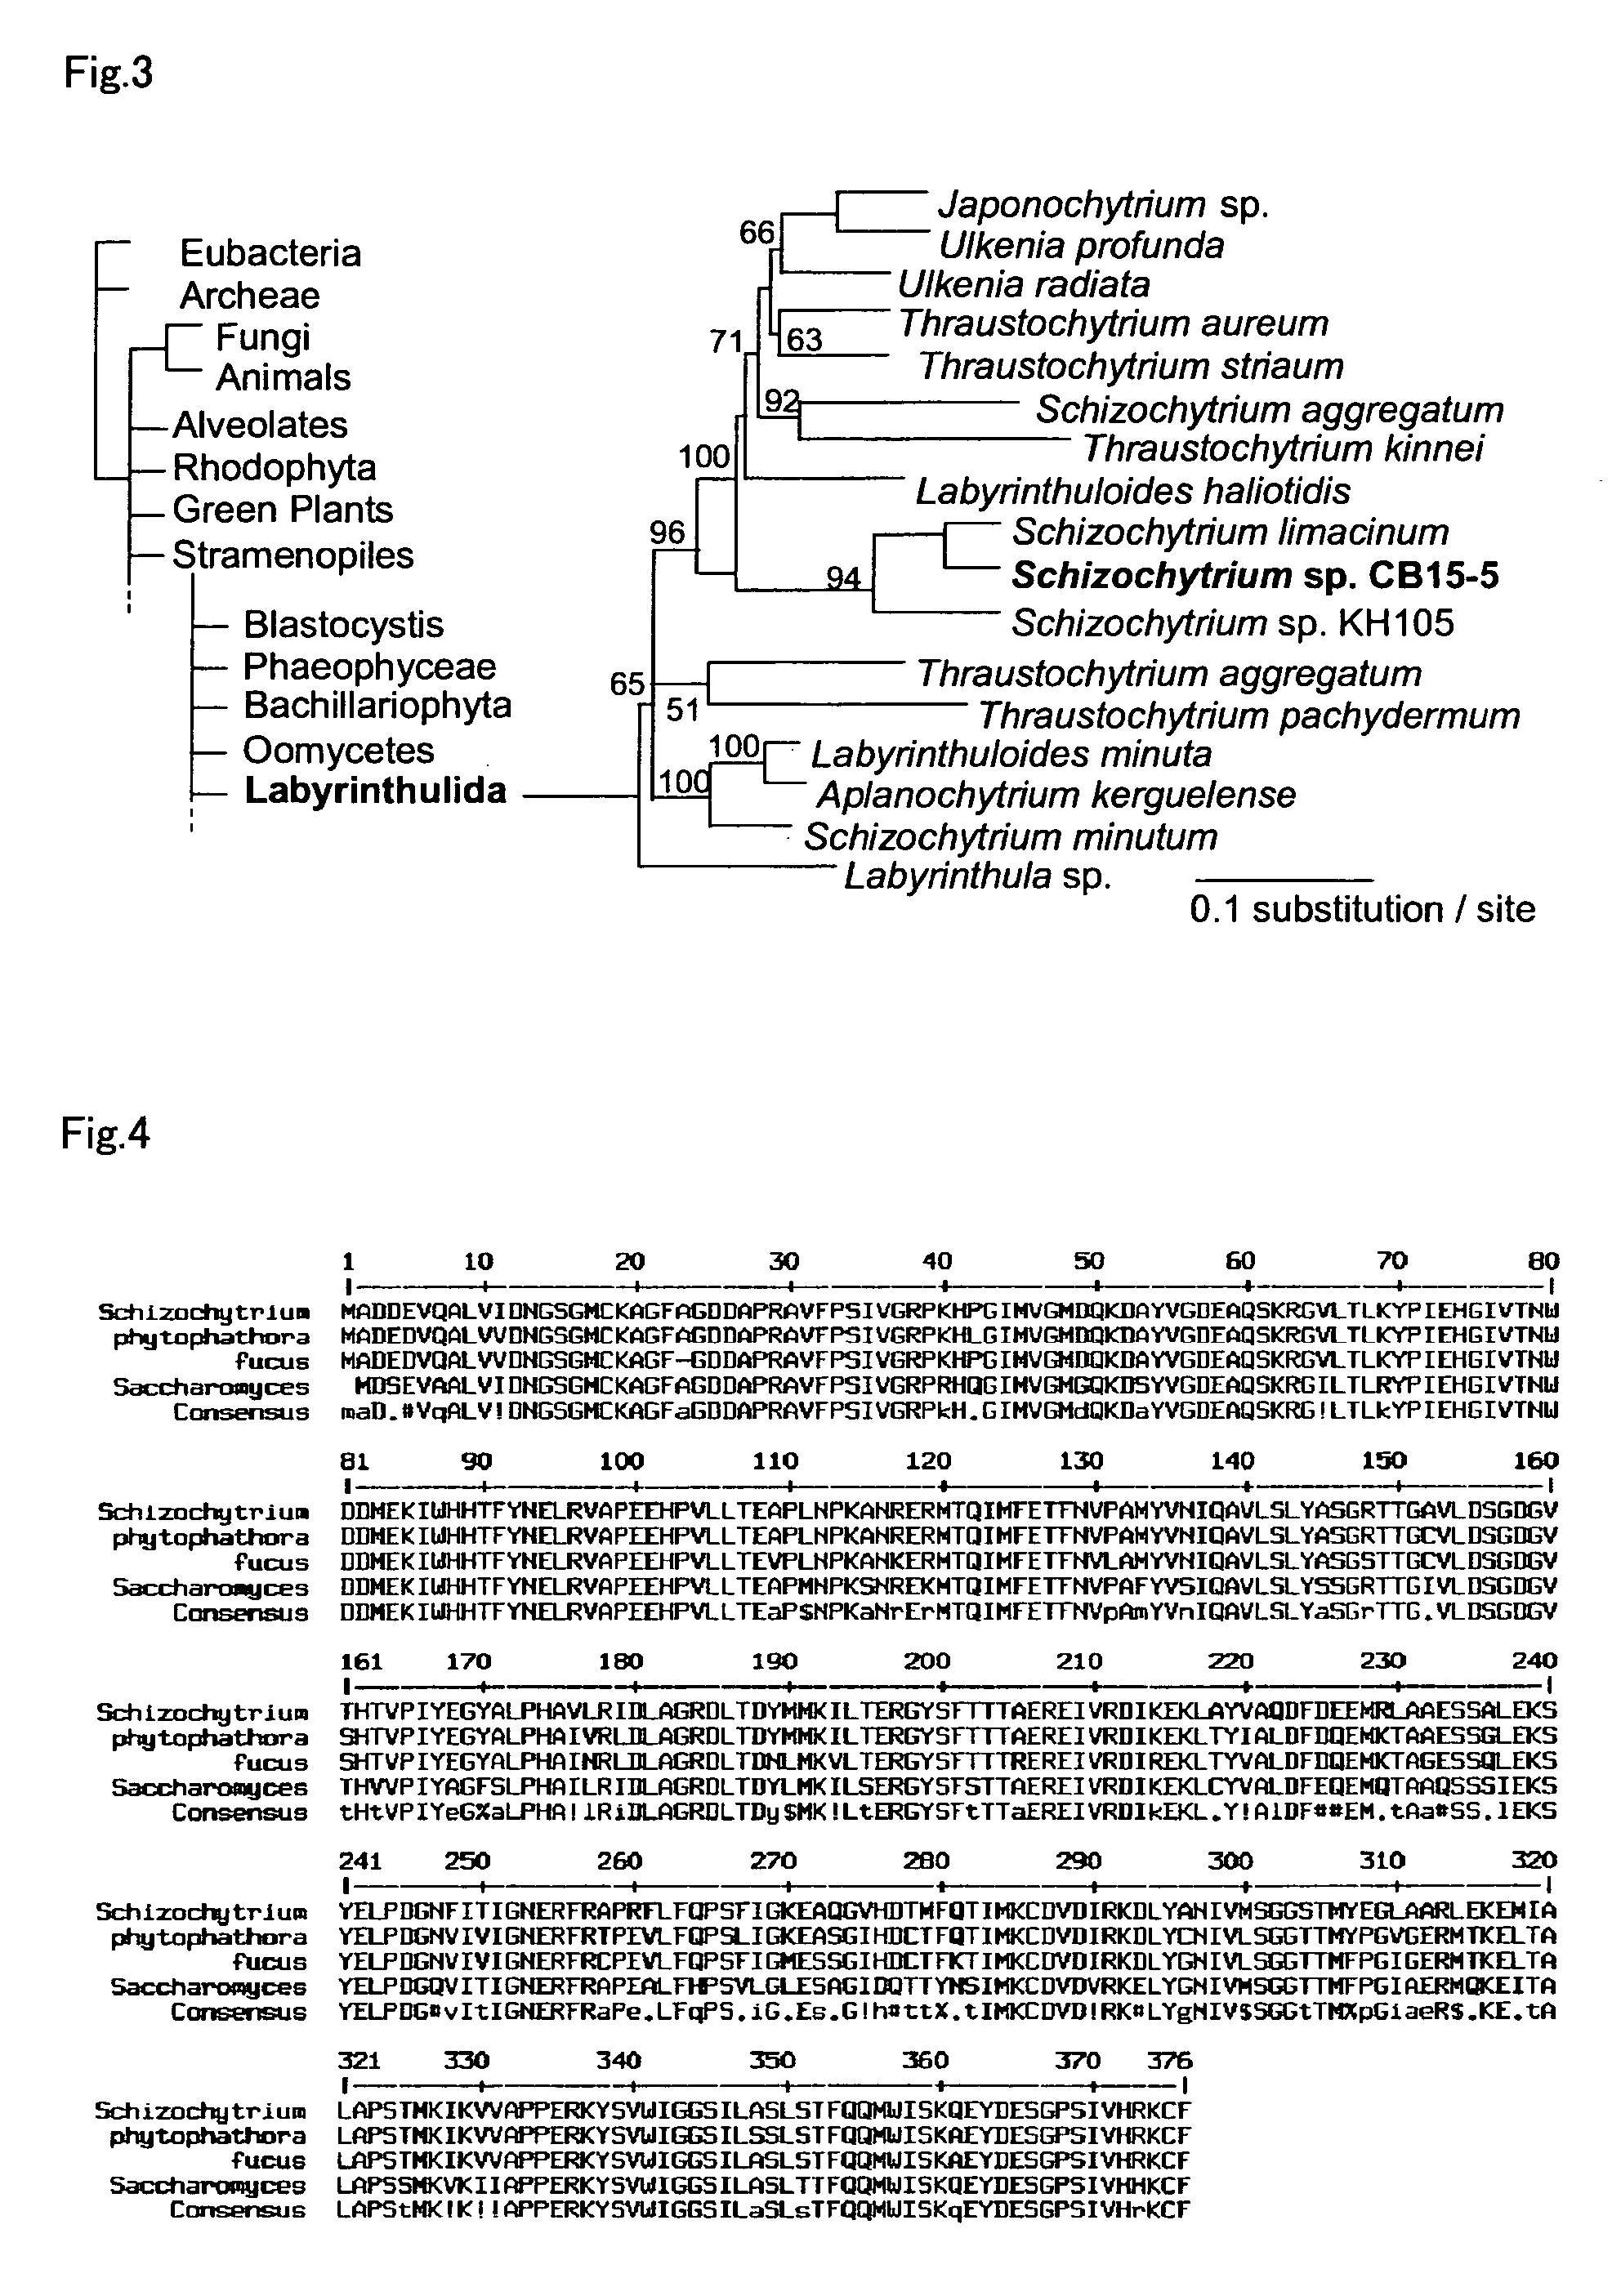 Method for introducing a gene into Labyrinthulomycota